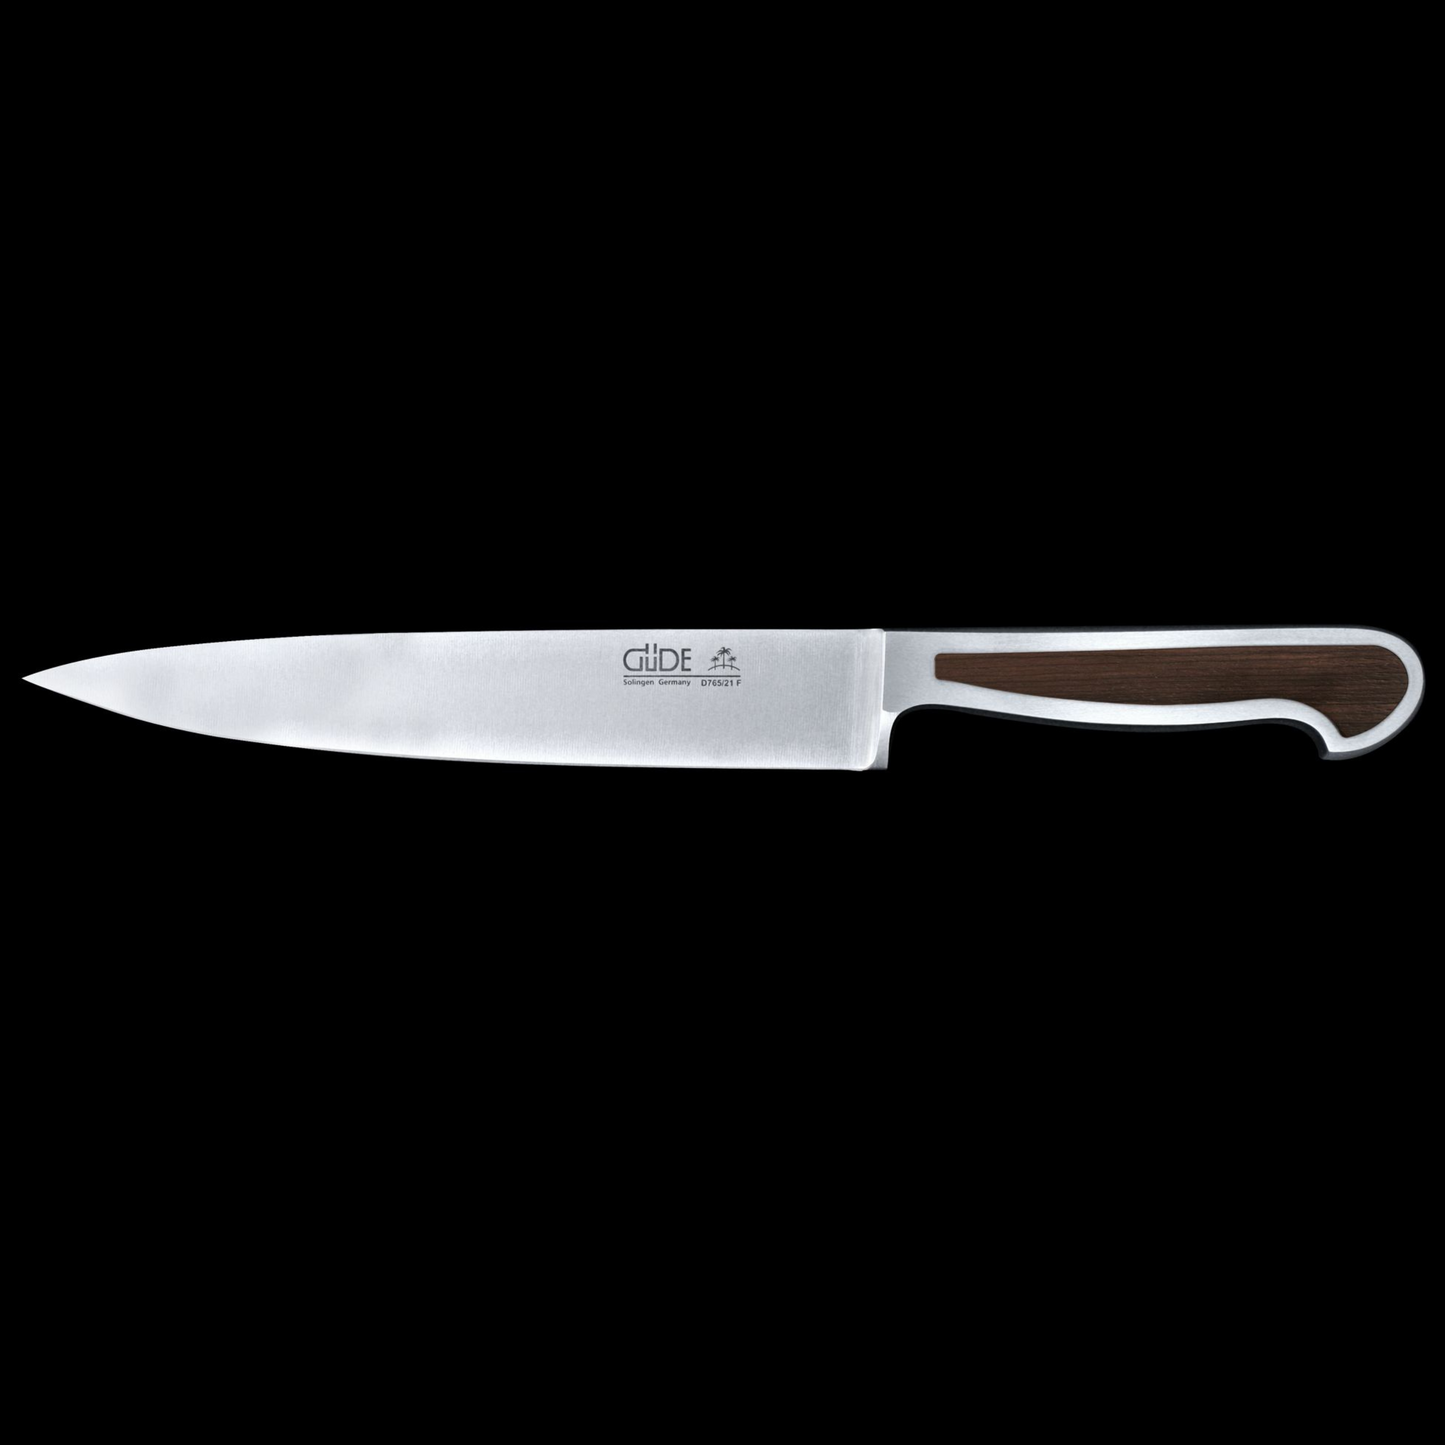 Gude Delta Series Forged Double bolster Slicing Knife 8", African Black Wood Handle - GuedeUSA